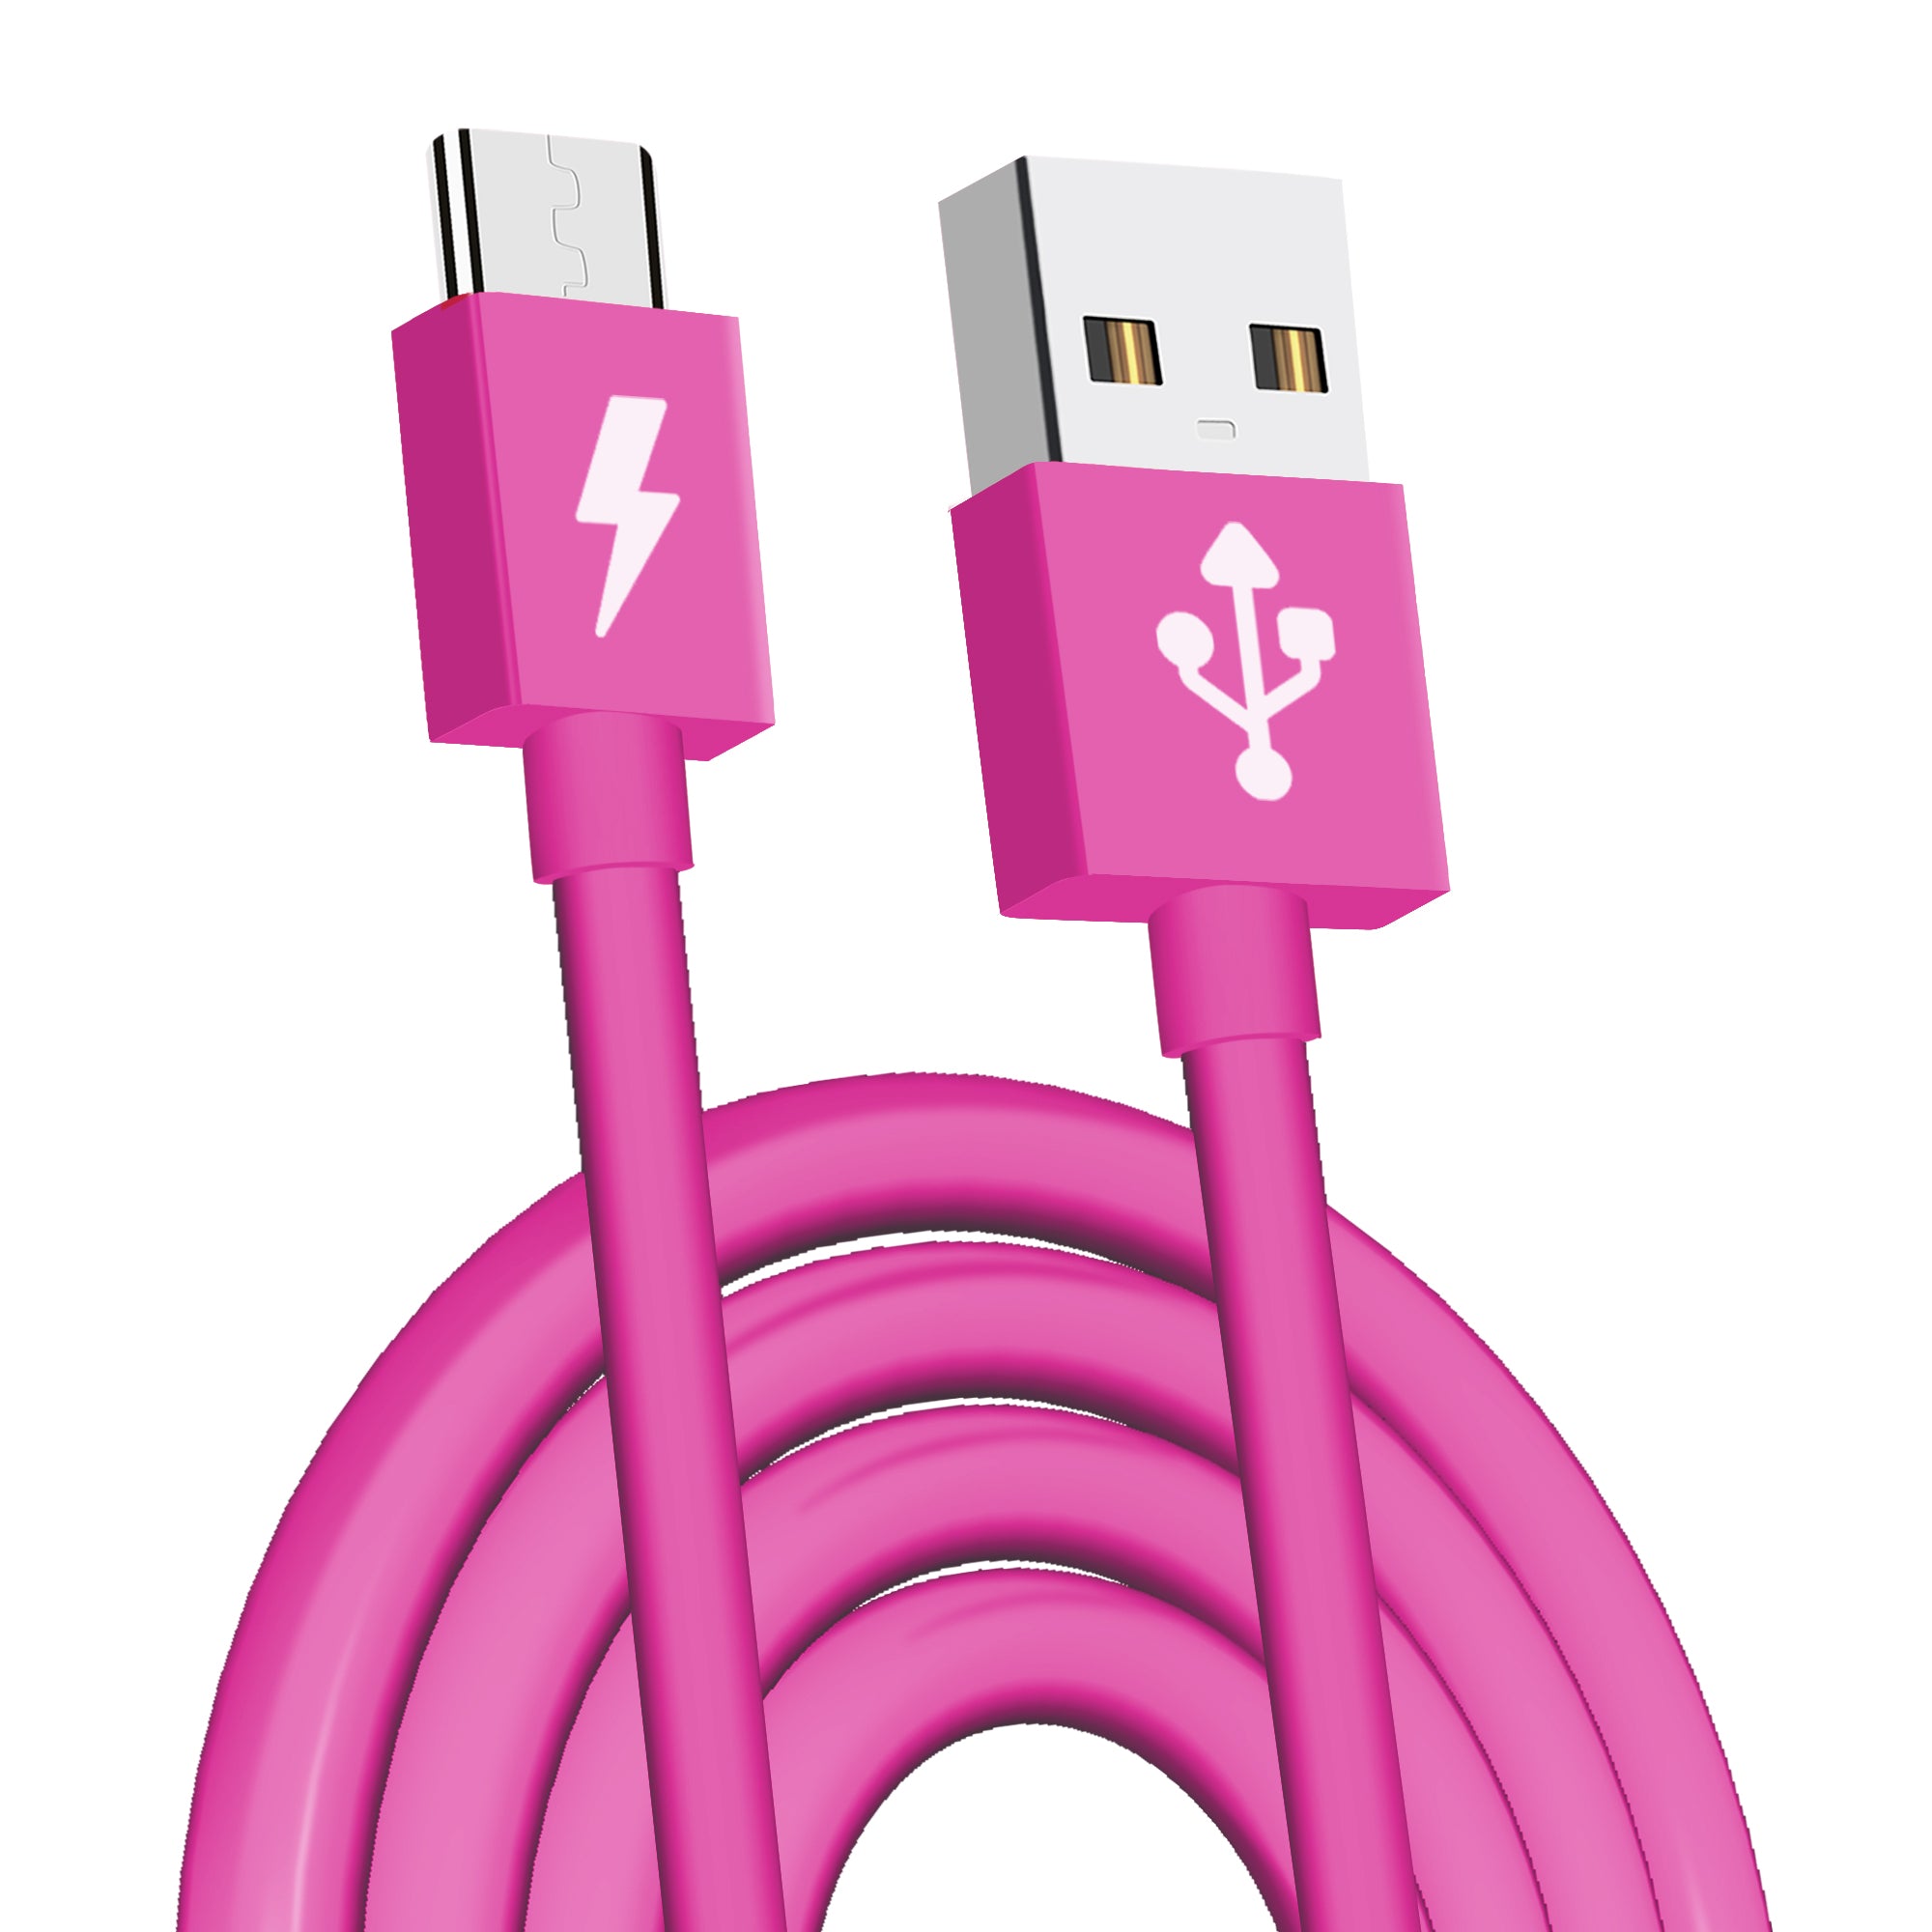 Micro USB 2.0 Data Sync Charger Cable Lead For Mobile Phones 3m Long in Unique Colours.